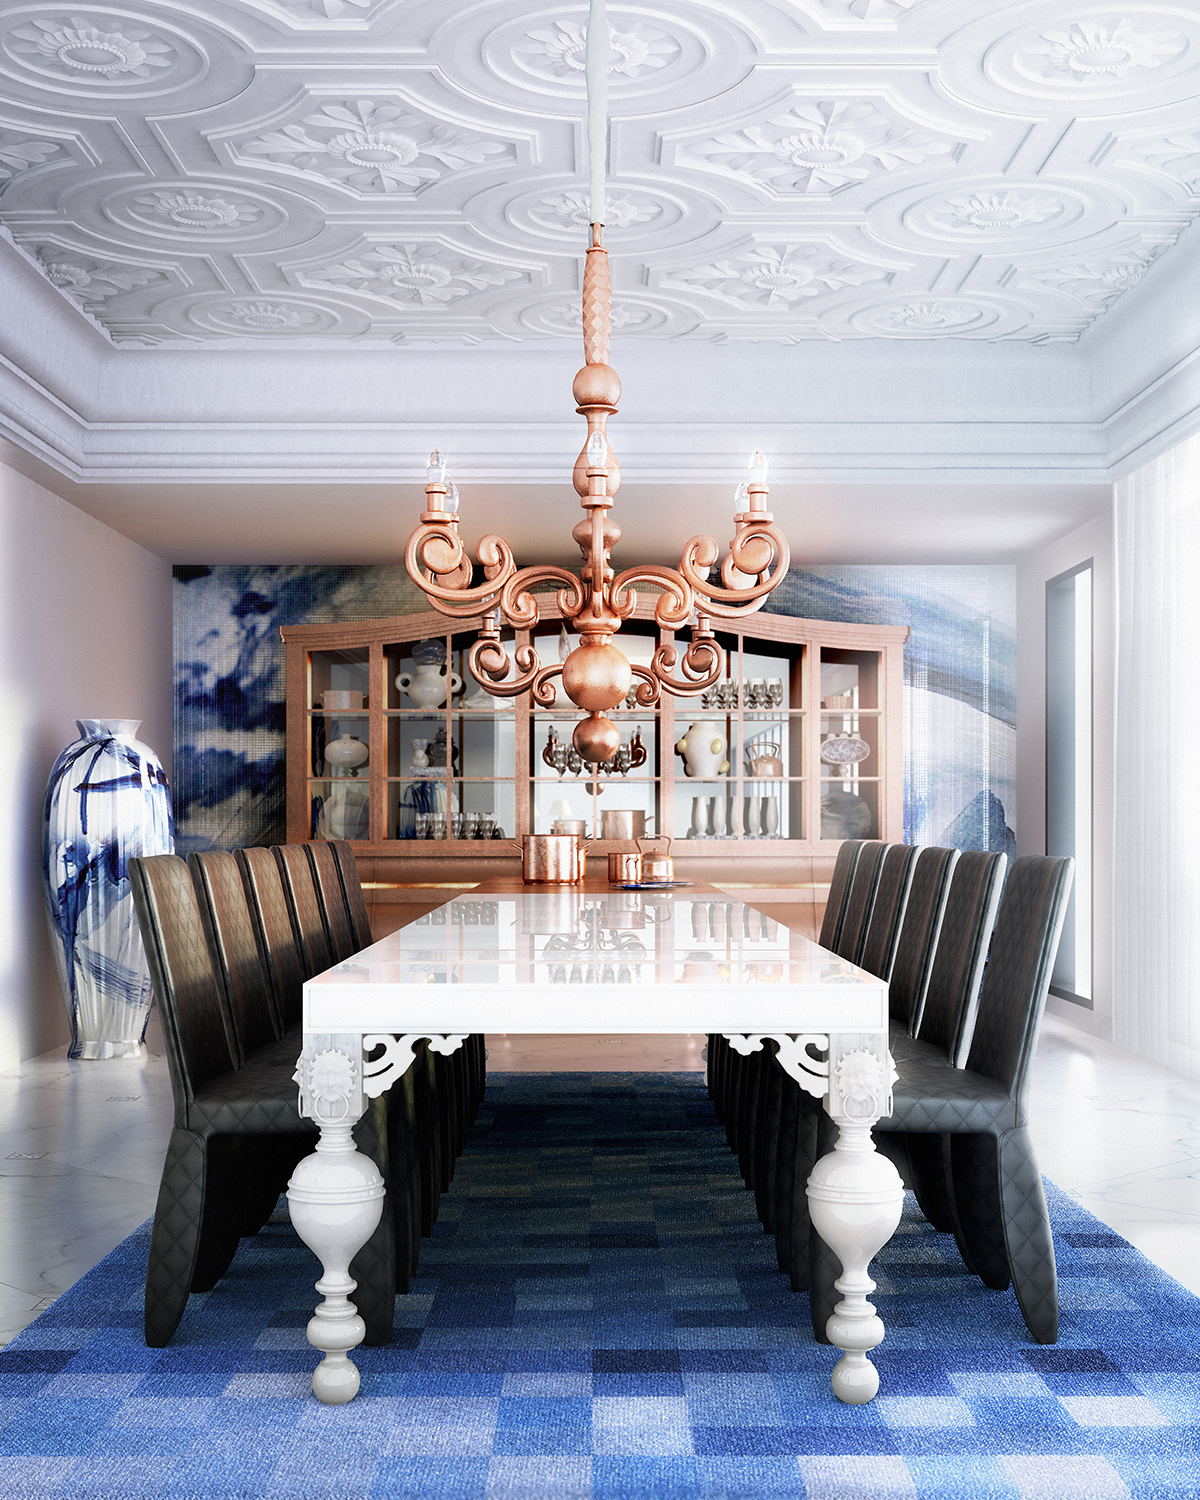 Private Residence Tapei By Marcel Wanders